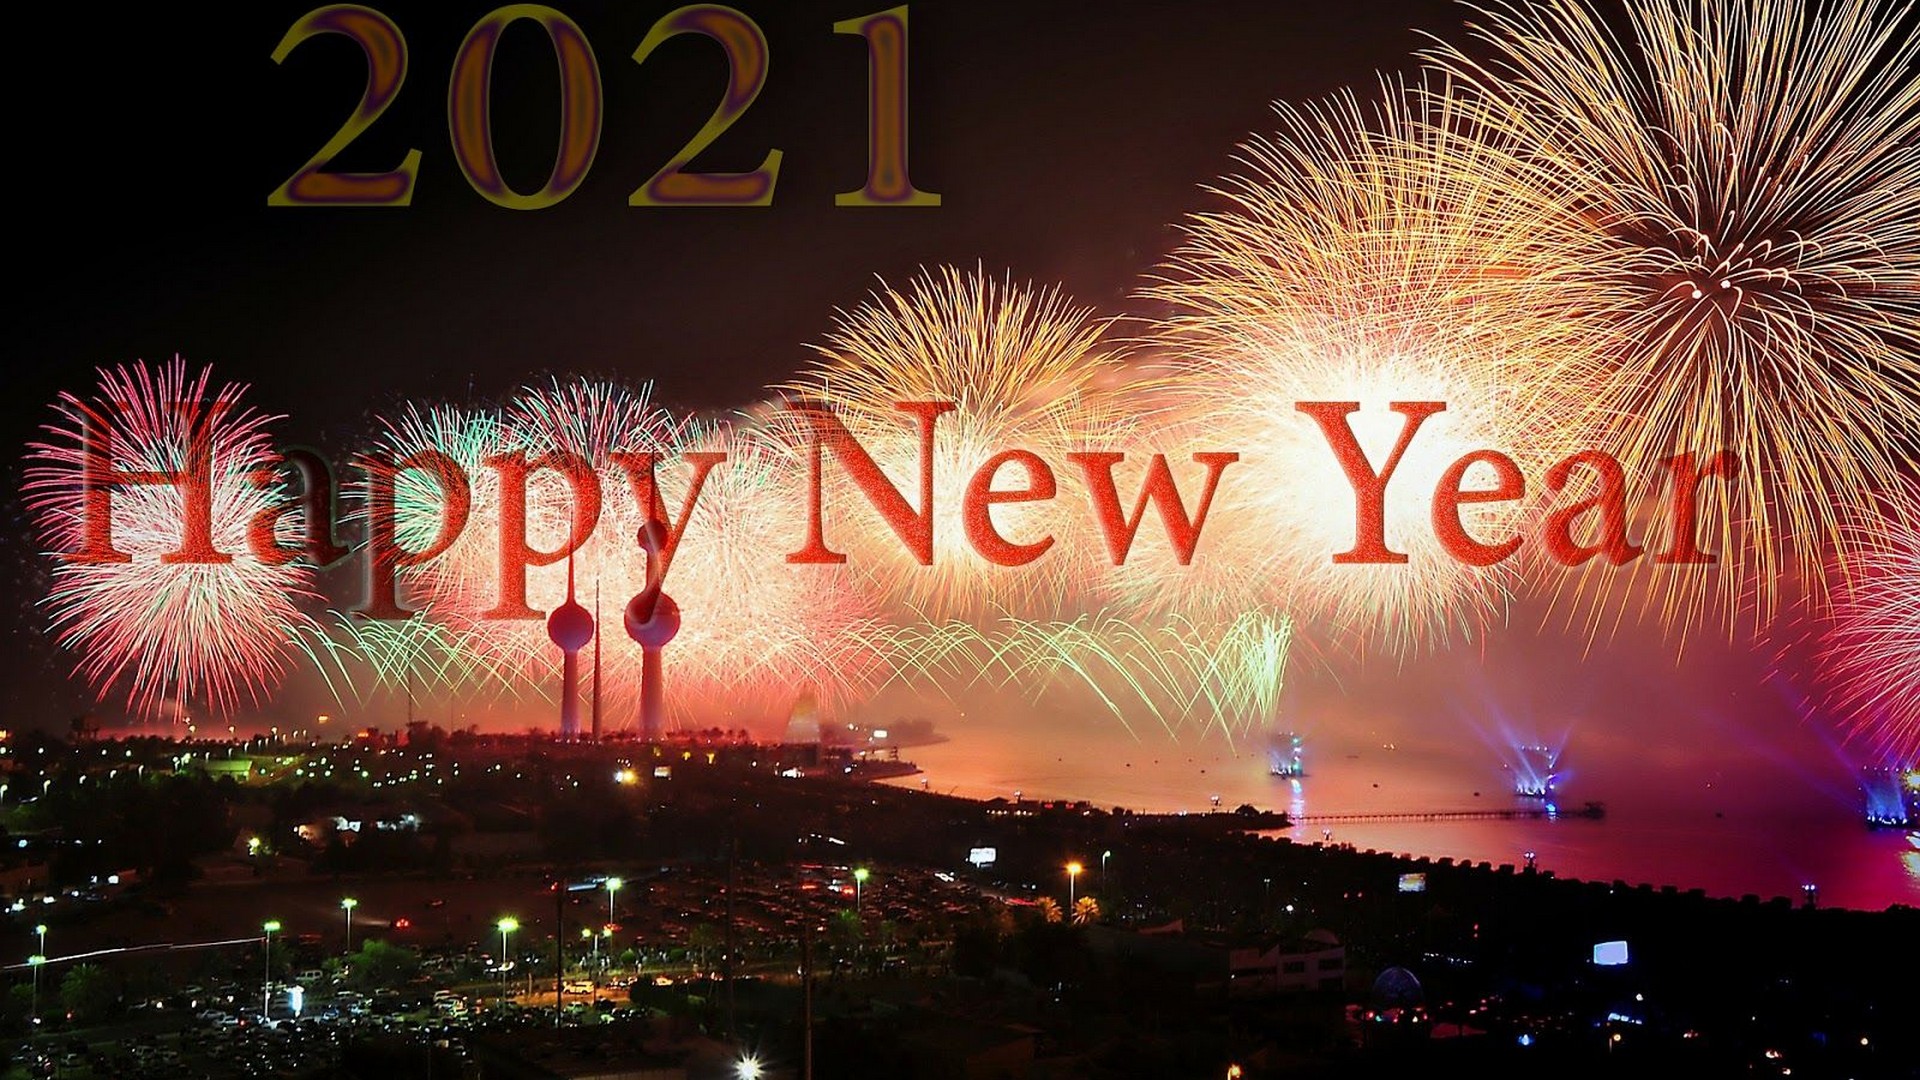 Wallpapers Computer Happy New Year | 2021 Live Wallpaper HD